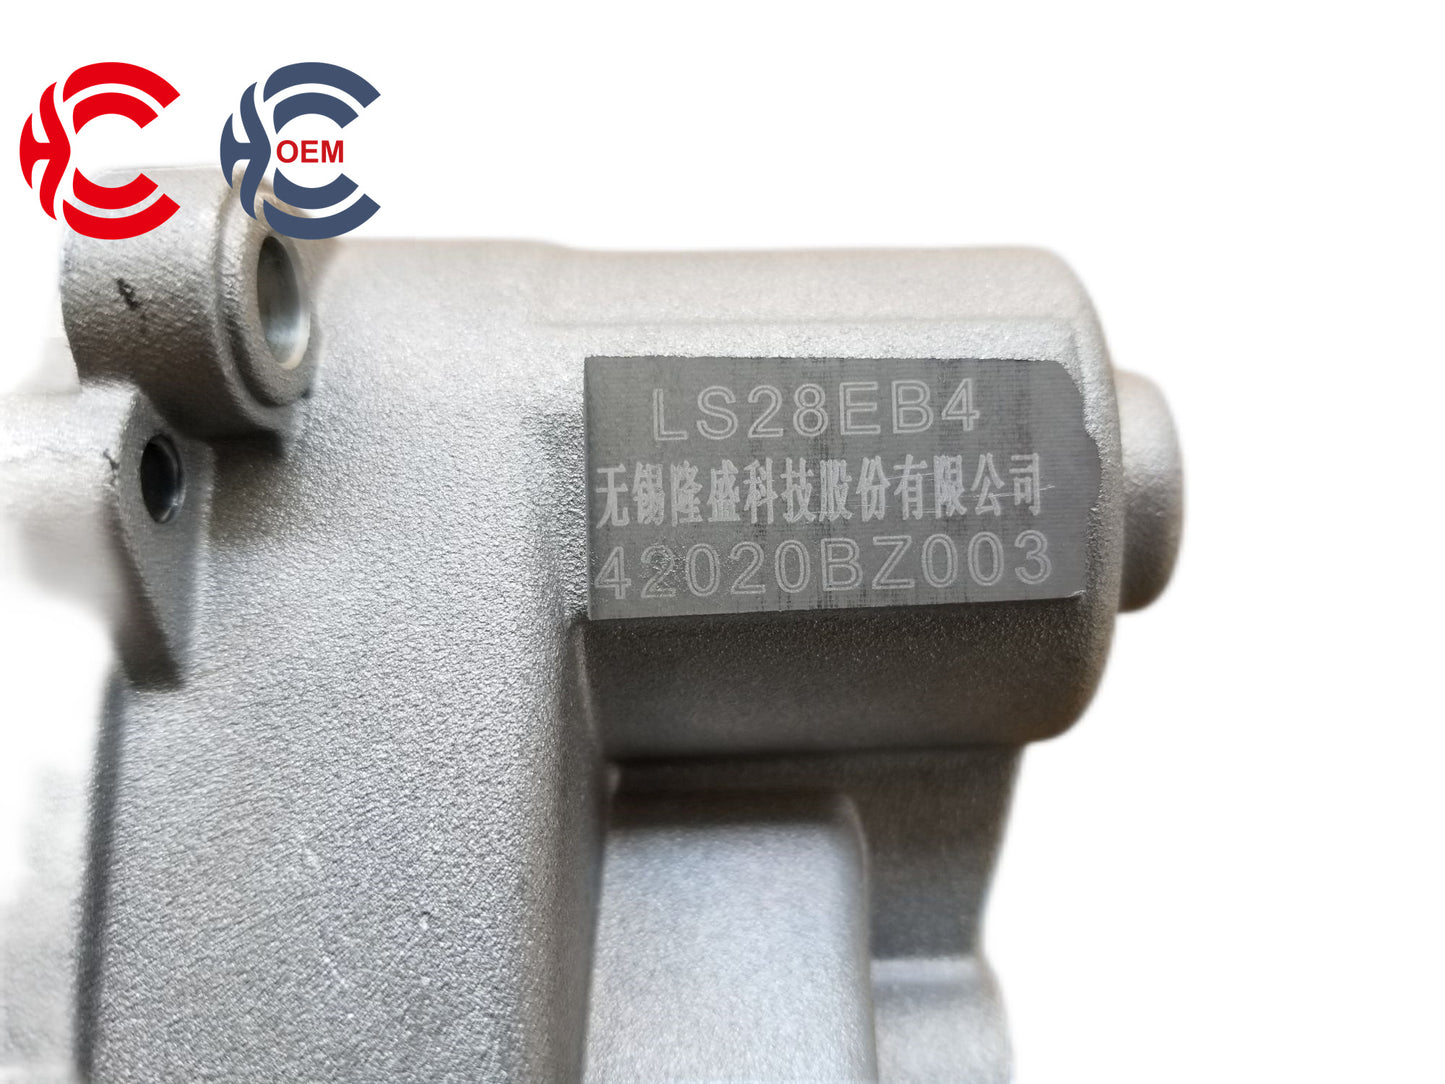 OEM: 42020BZ003 E3840034809A0Material: ABS MetalColor: black silver goldenOrigin: Made in ChinaWeight: 1000gPacking List: 1* Exhaust Gas Recirculation Valve More ServiceWe can provide OEM Manufacturing serviceWe can Be your one-step solution for Auto PartsWe can provide technical scheme for you Feel Free to Contact Us, We will get back to you as soon as possible.